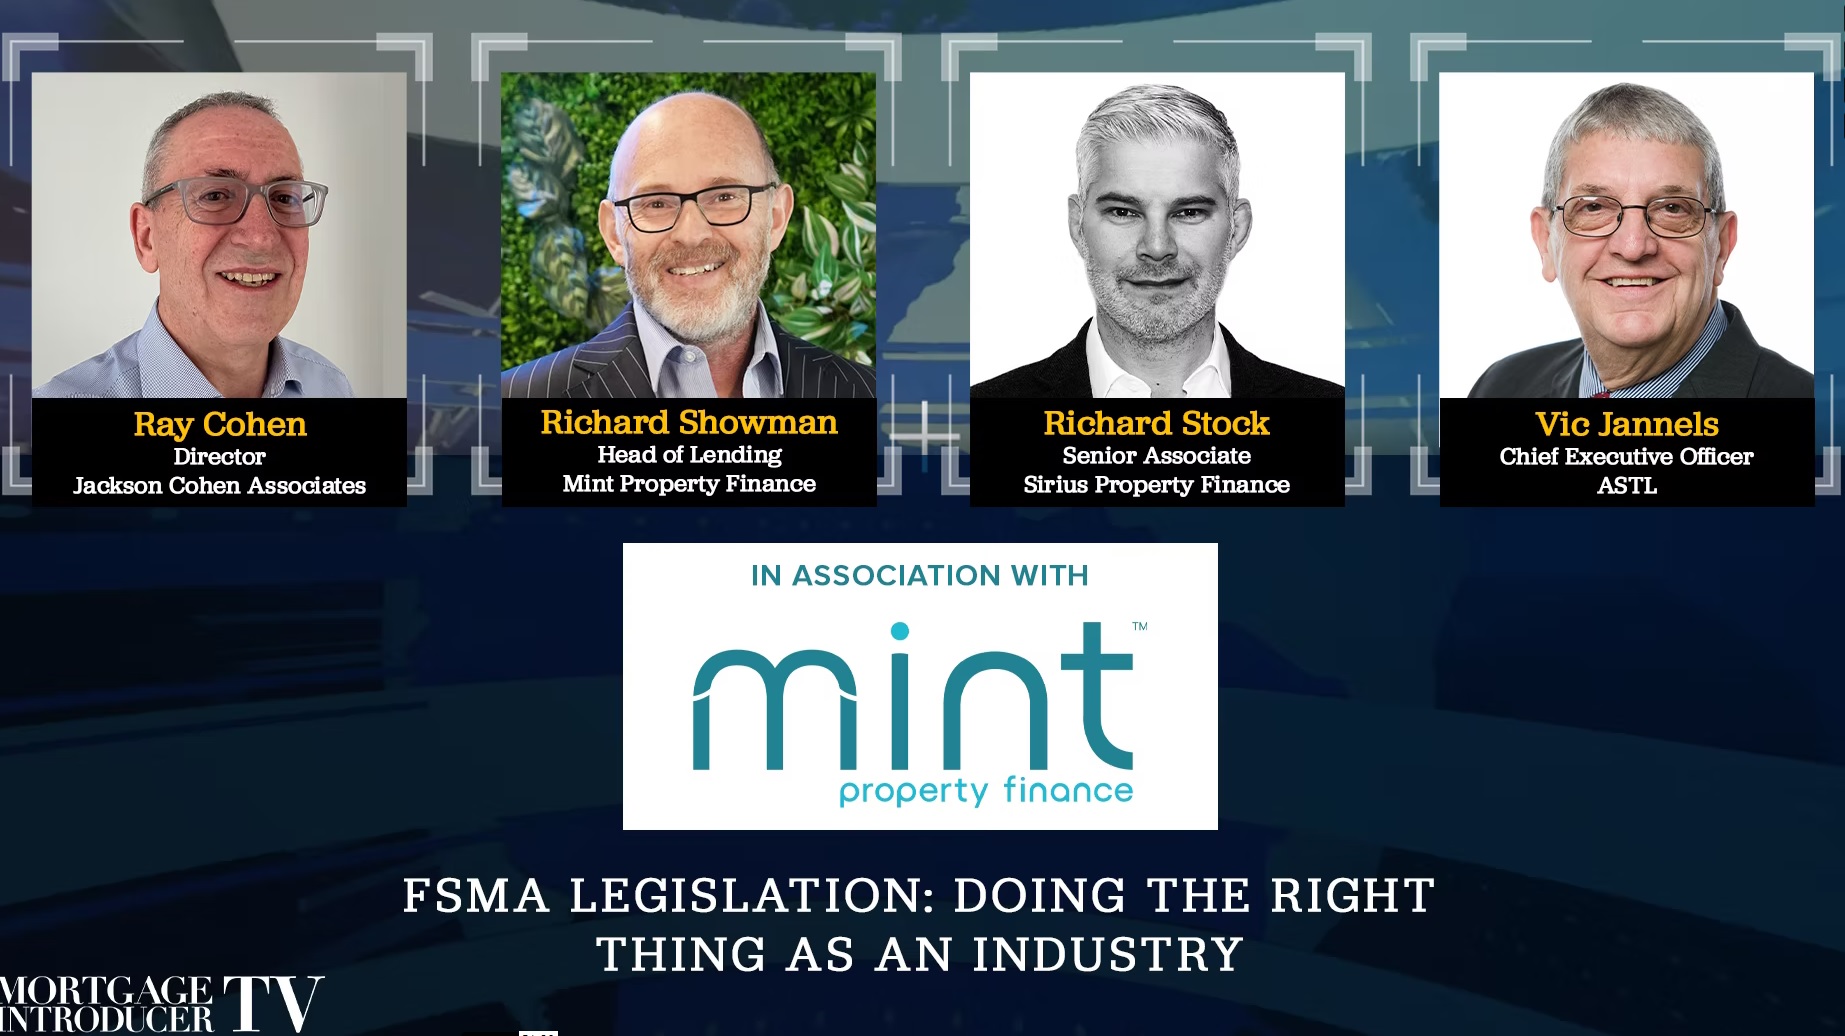 What impact does FSMA regulation have on brokers and lenders?